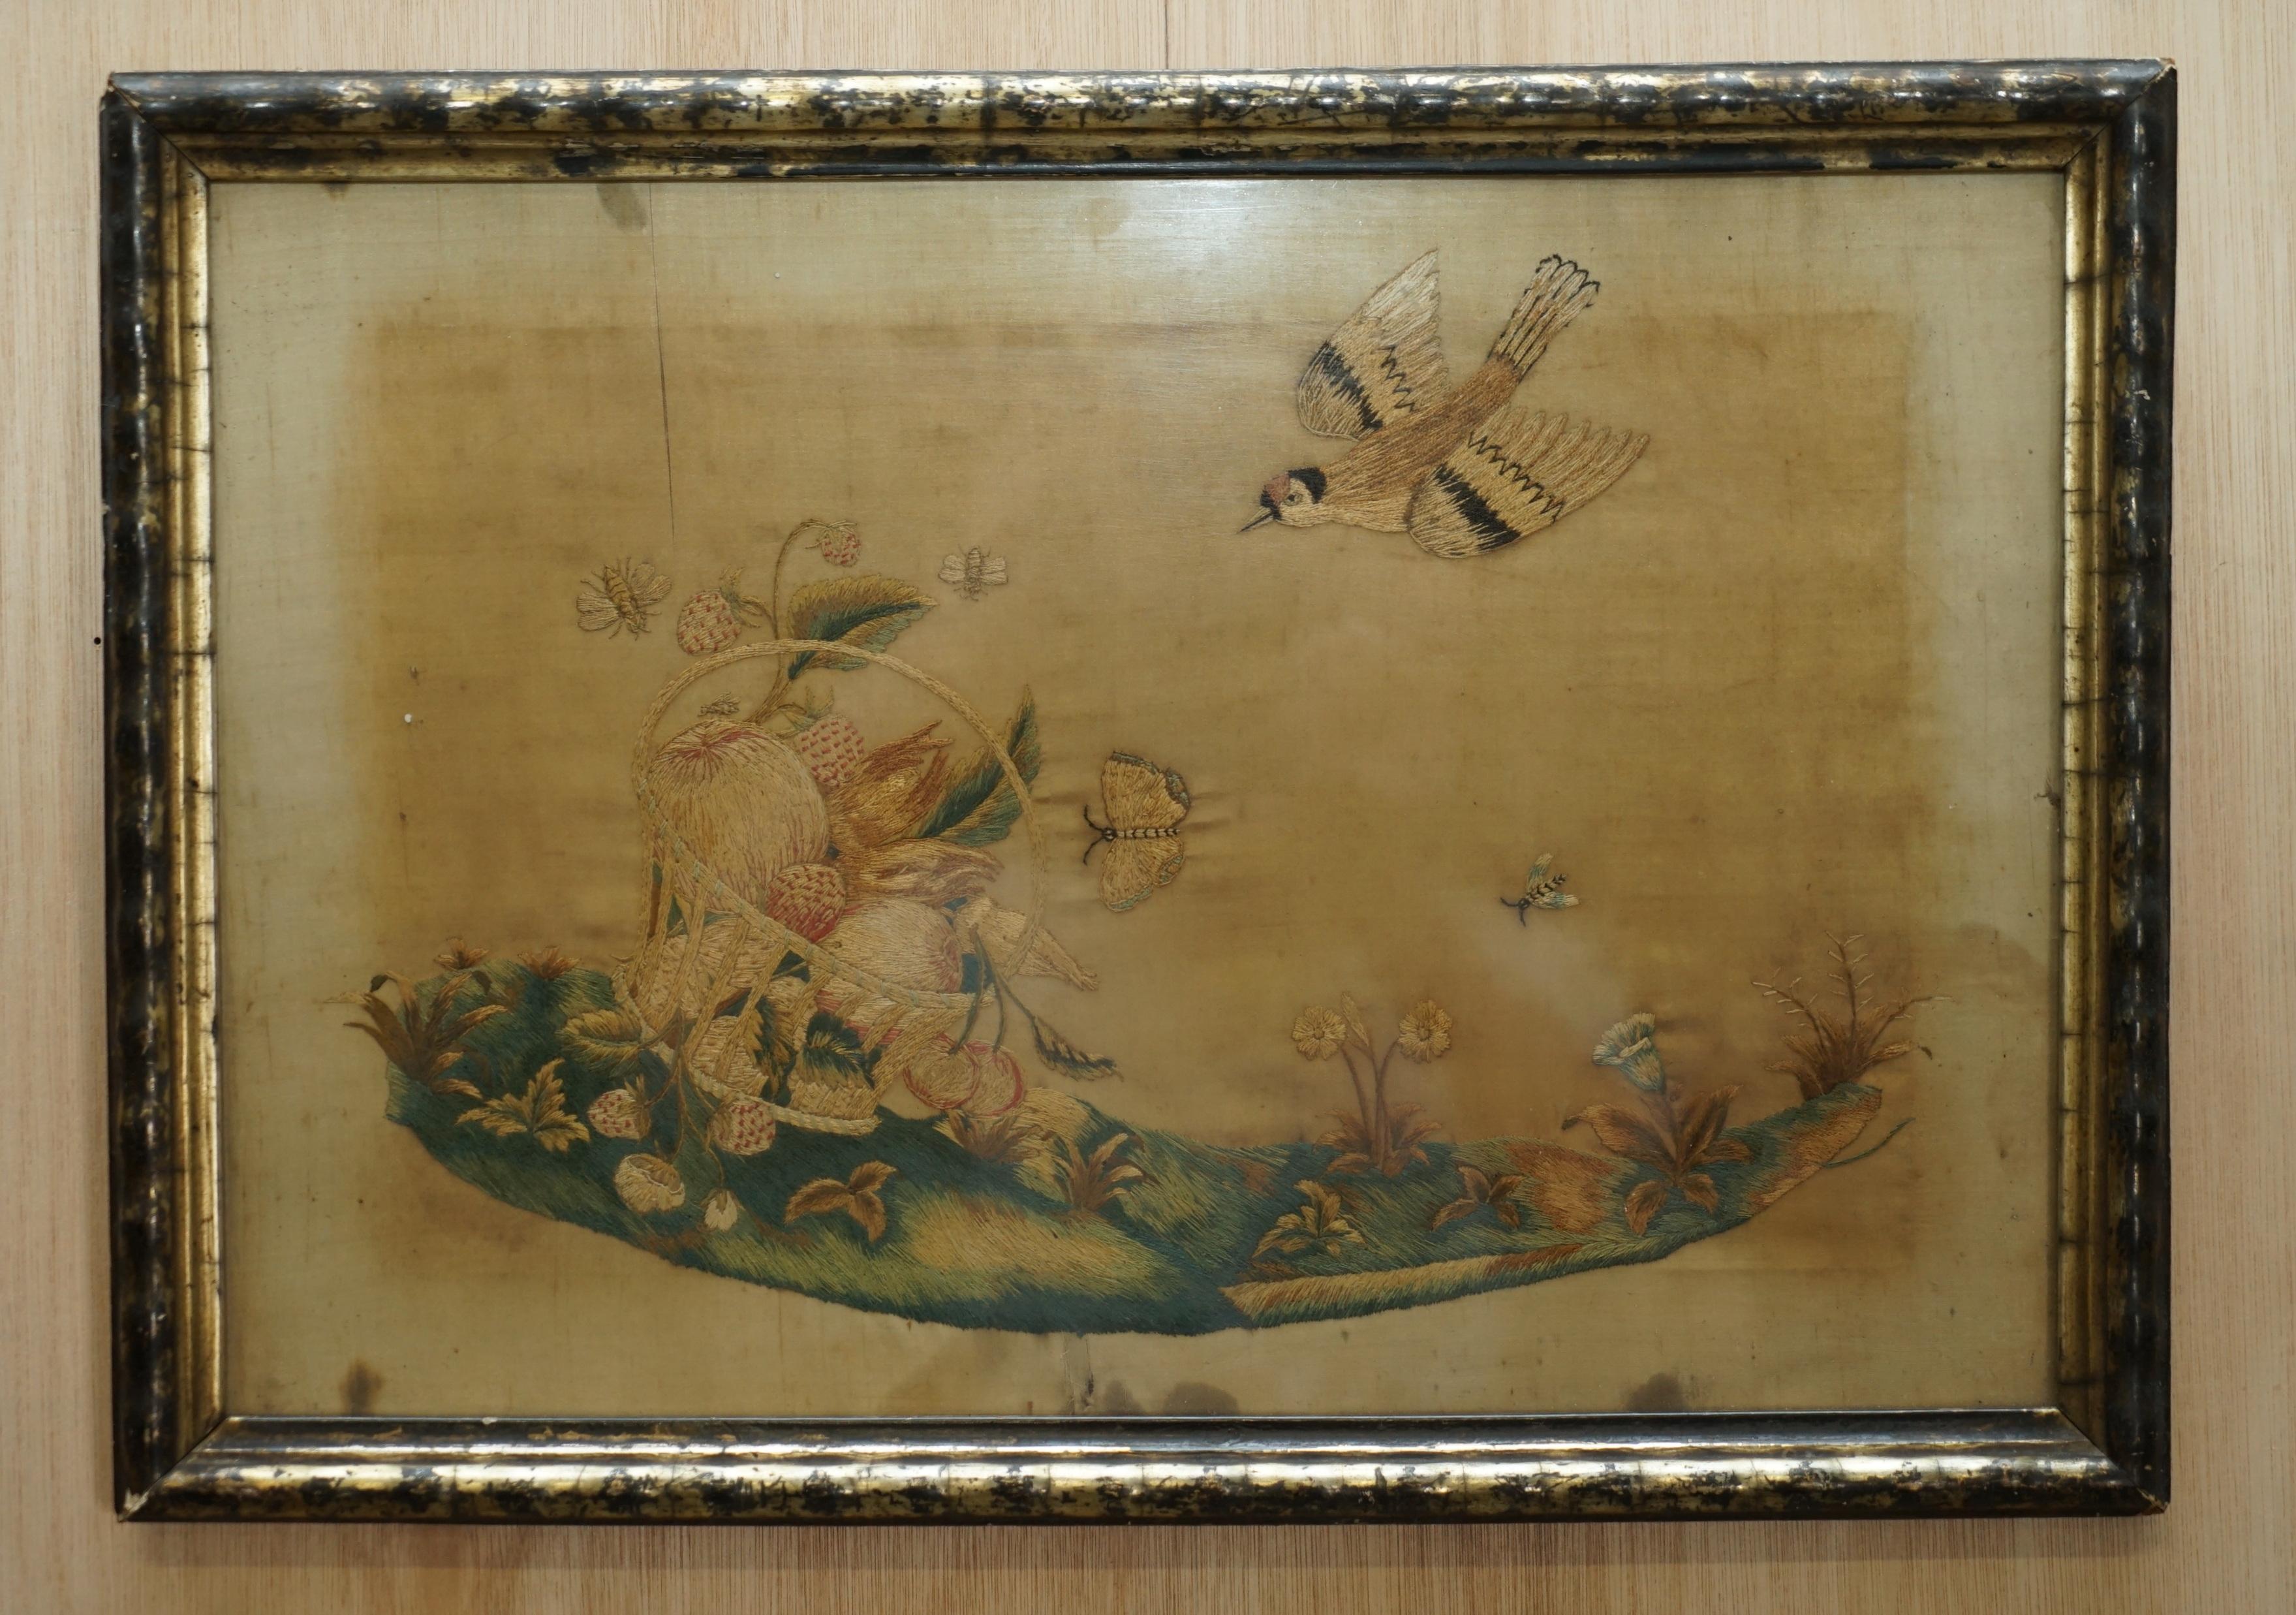 We are delighted to offer for sale this stunning original pair of circa 1850 Silk Embroidered pictures depicting birds and fruit 

A very good looking and decorative pair, they have aged well and look every bit their 170+ years 

The condition